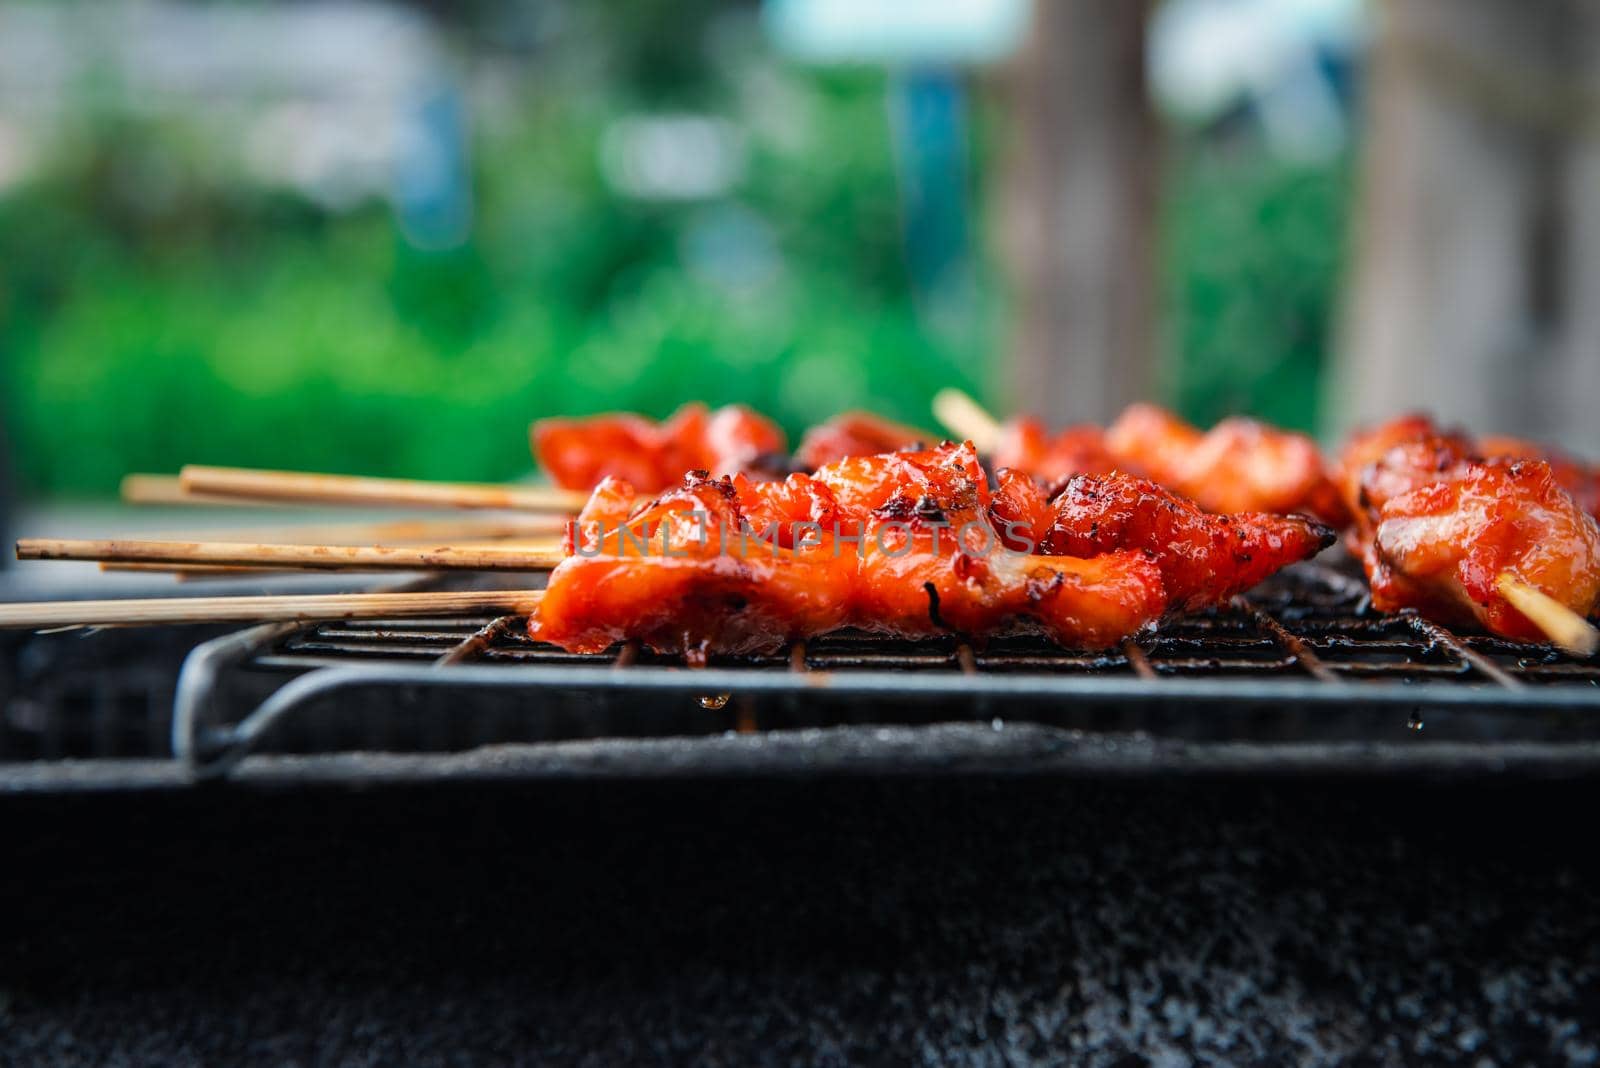 Grilled chicken sauce is a Thai barbeque food by chicken and sauce cooking on charcoal with flames at Thai street food market